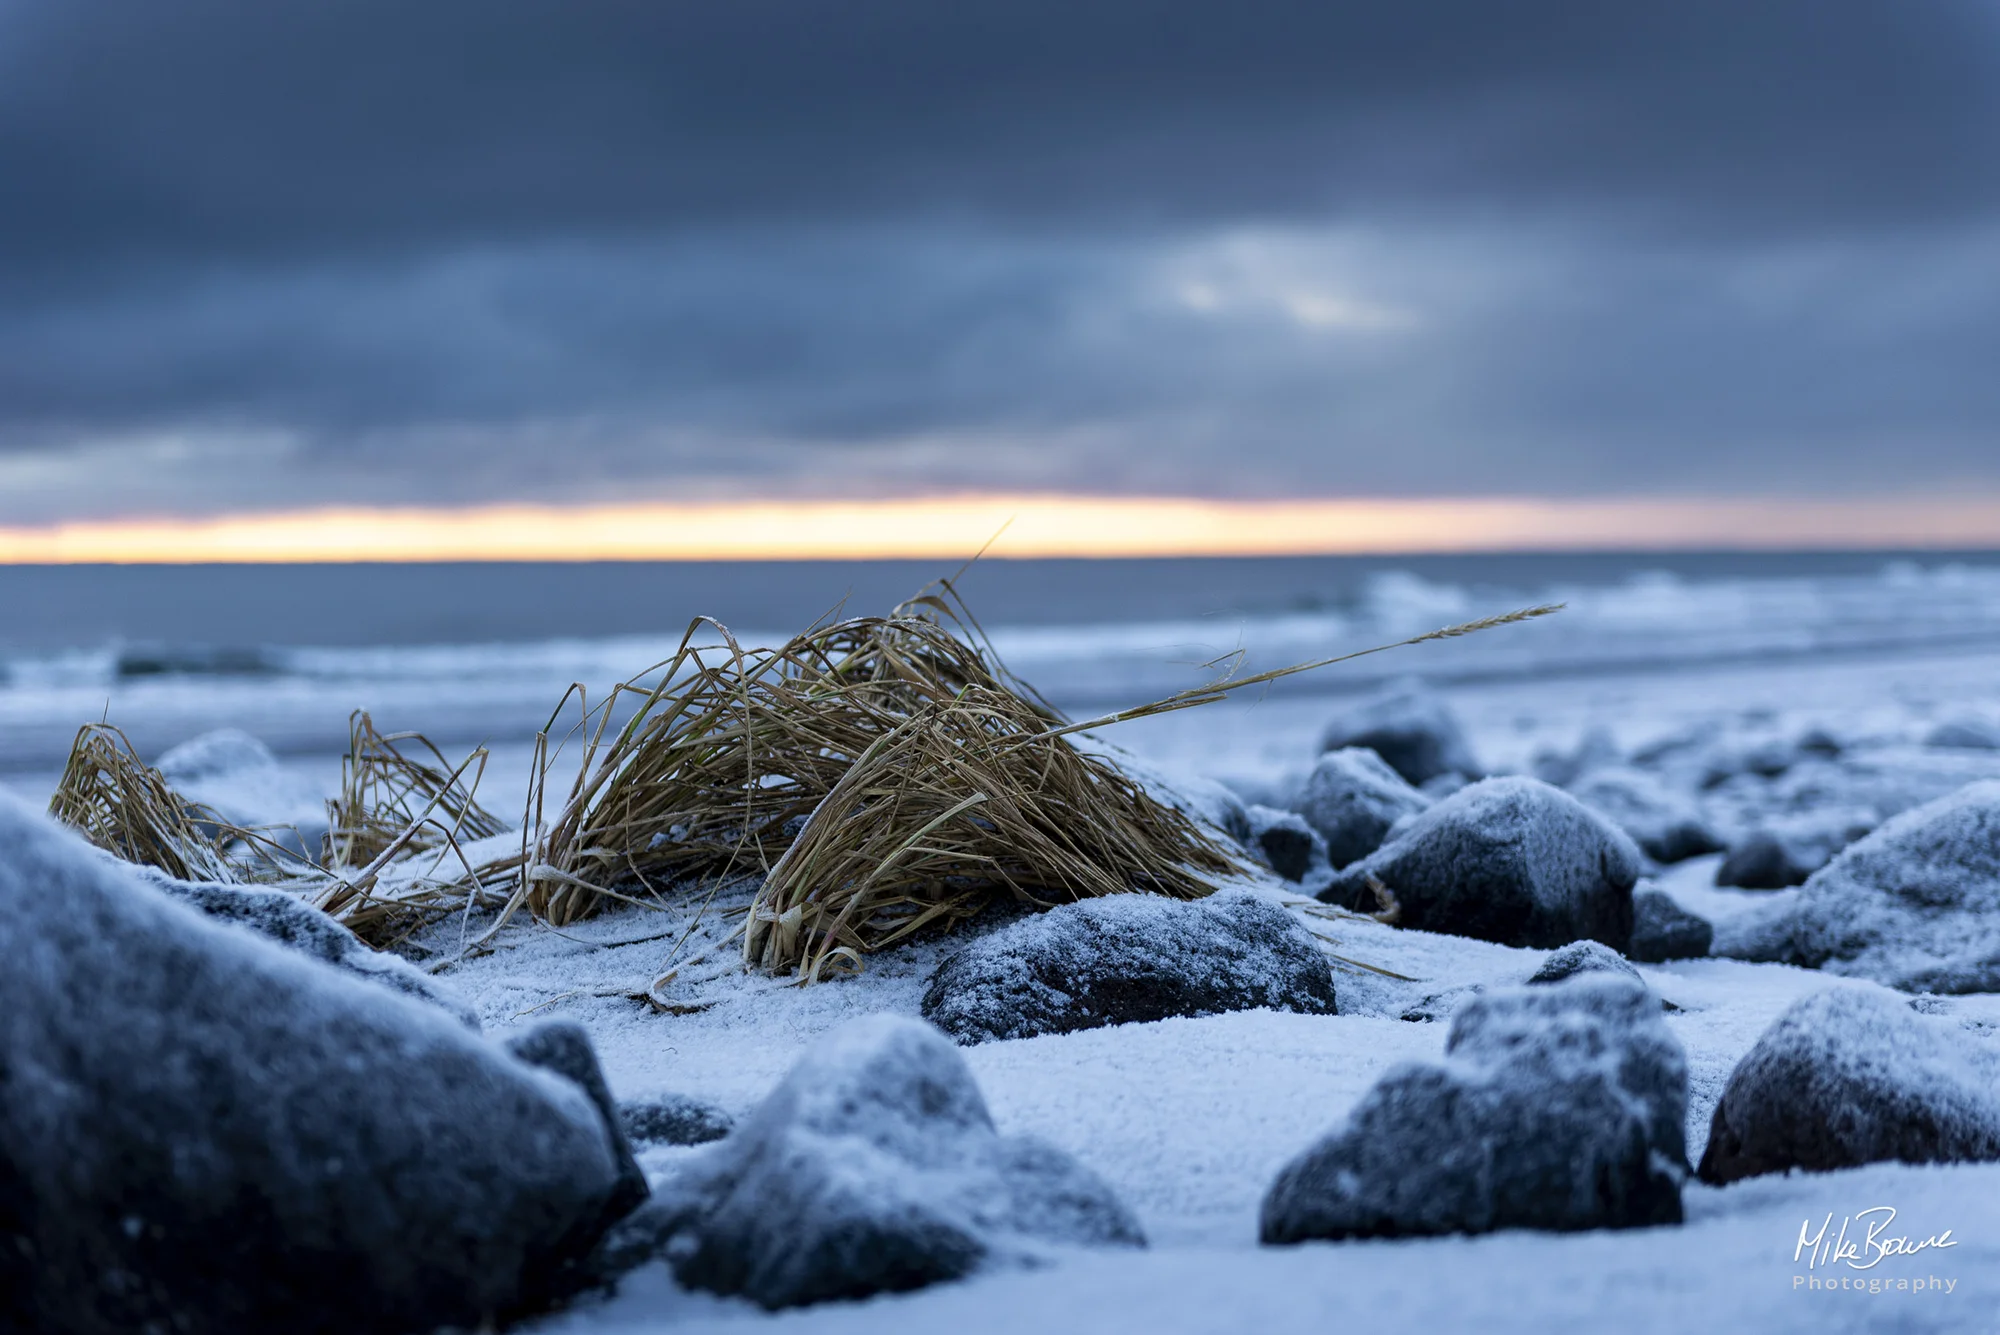 Tuft of dry yellow grass on a frost covered beach with storm clouds in sky